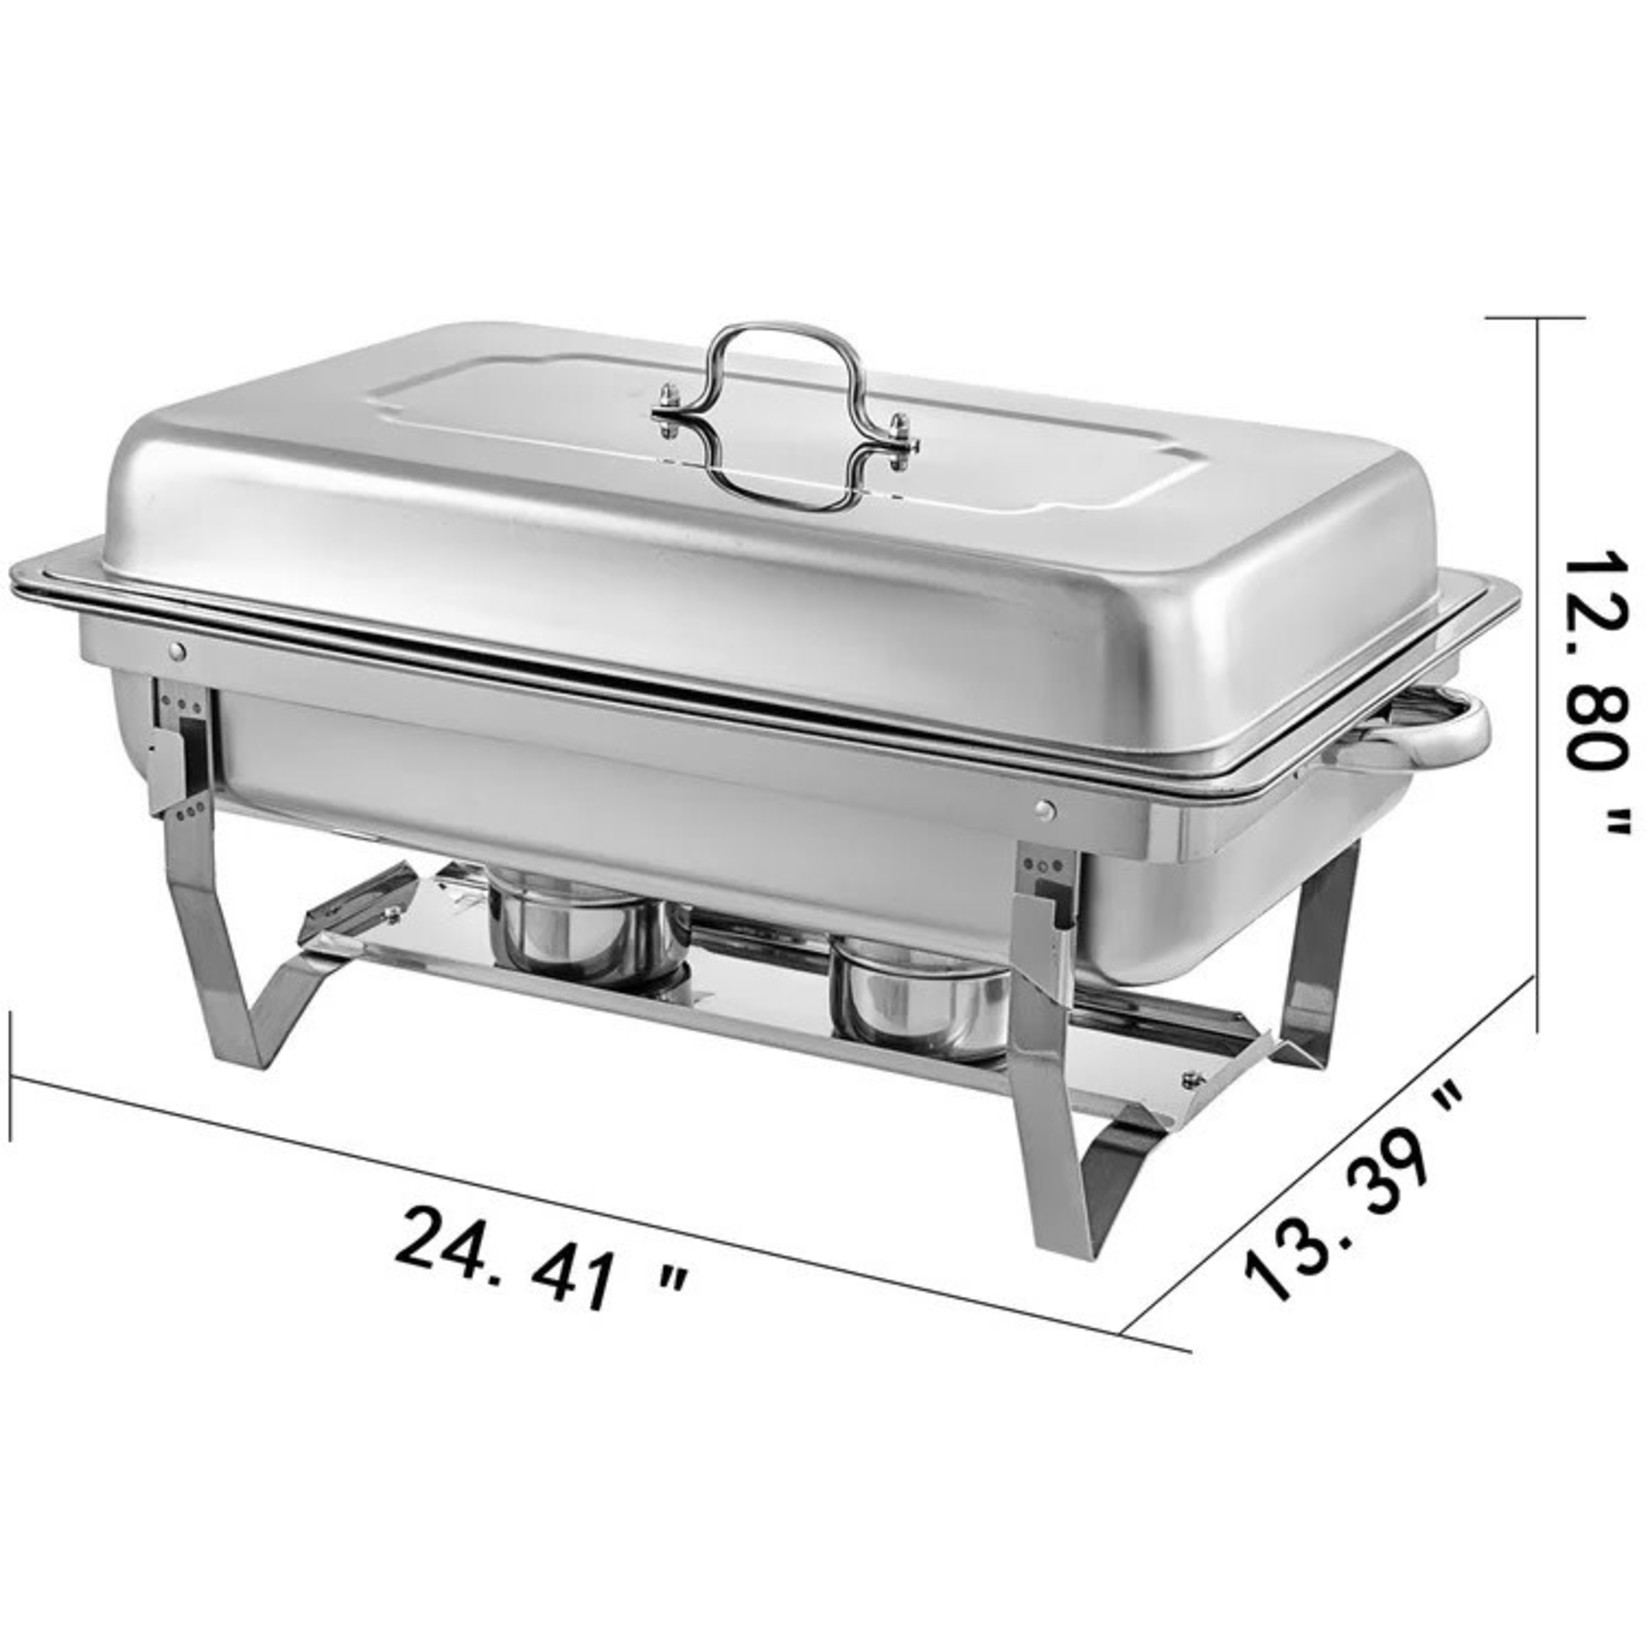 *Buffet Catering 8 qt. Chafing Dish - Stainless Steel